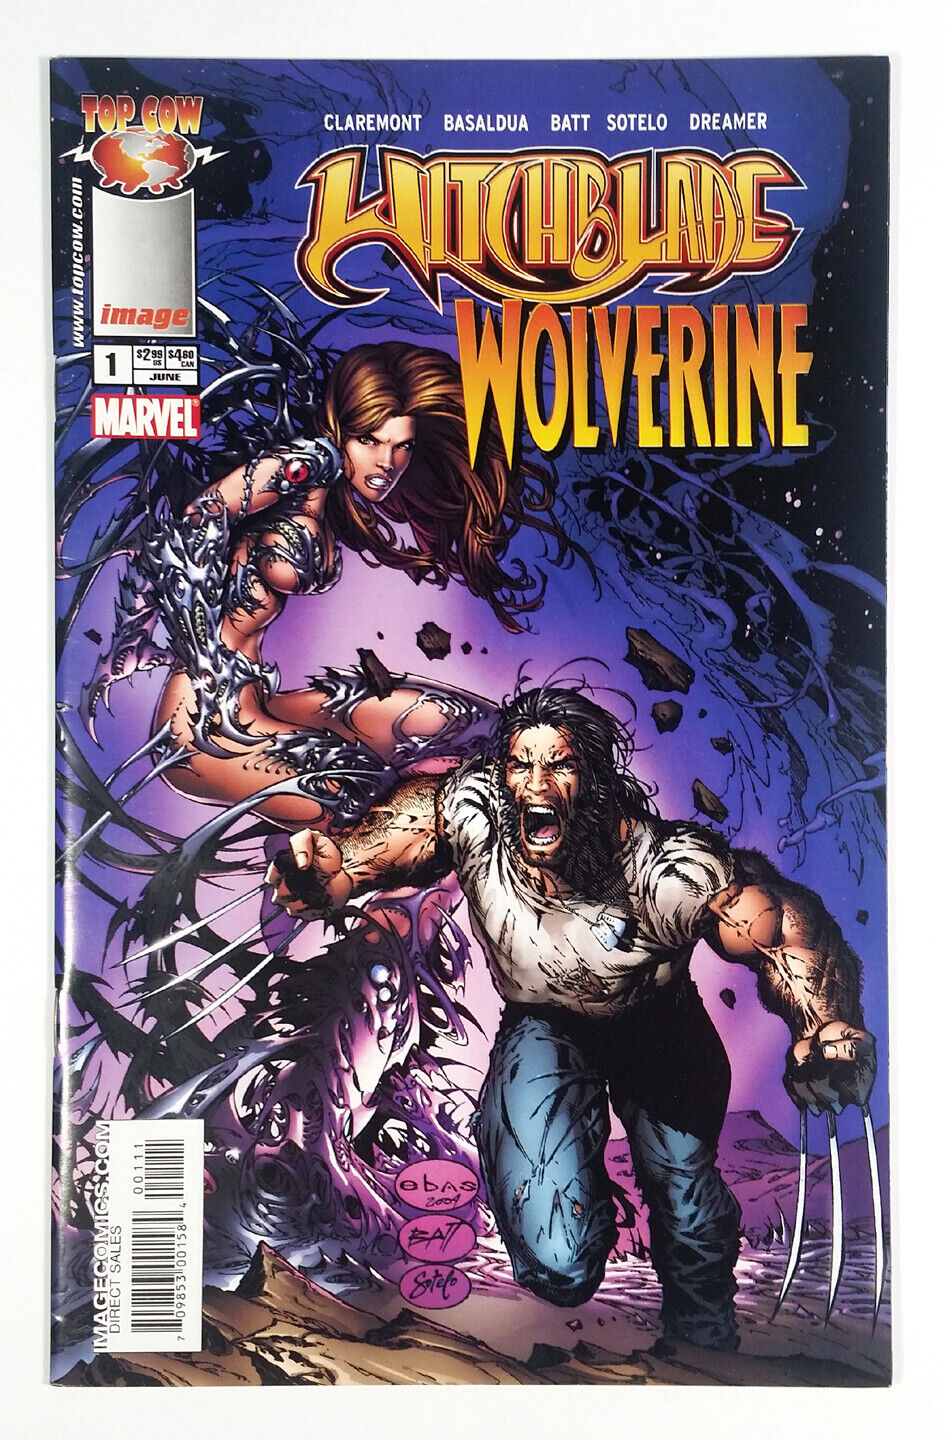 Witchblade Wolverine #1 (2004) Image/Top Cow Comics